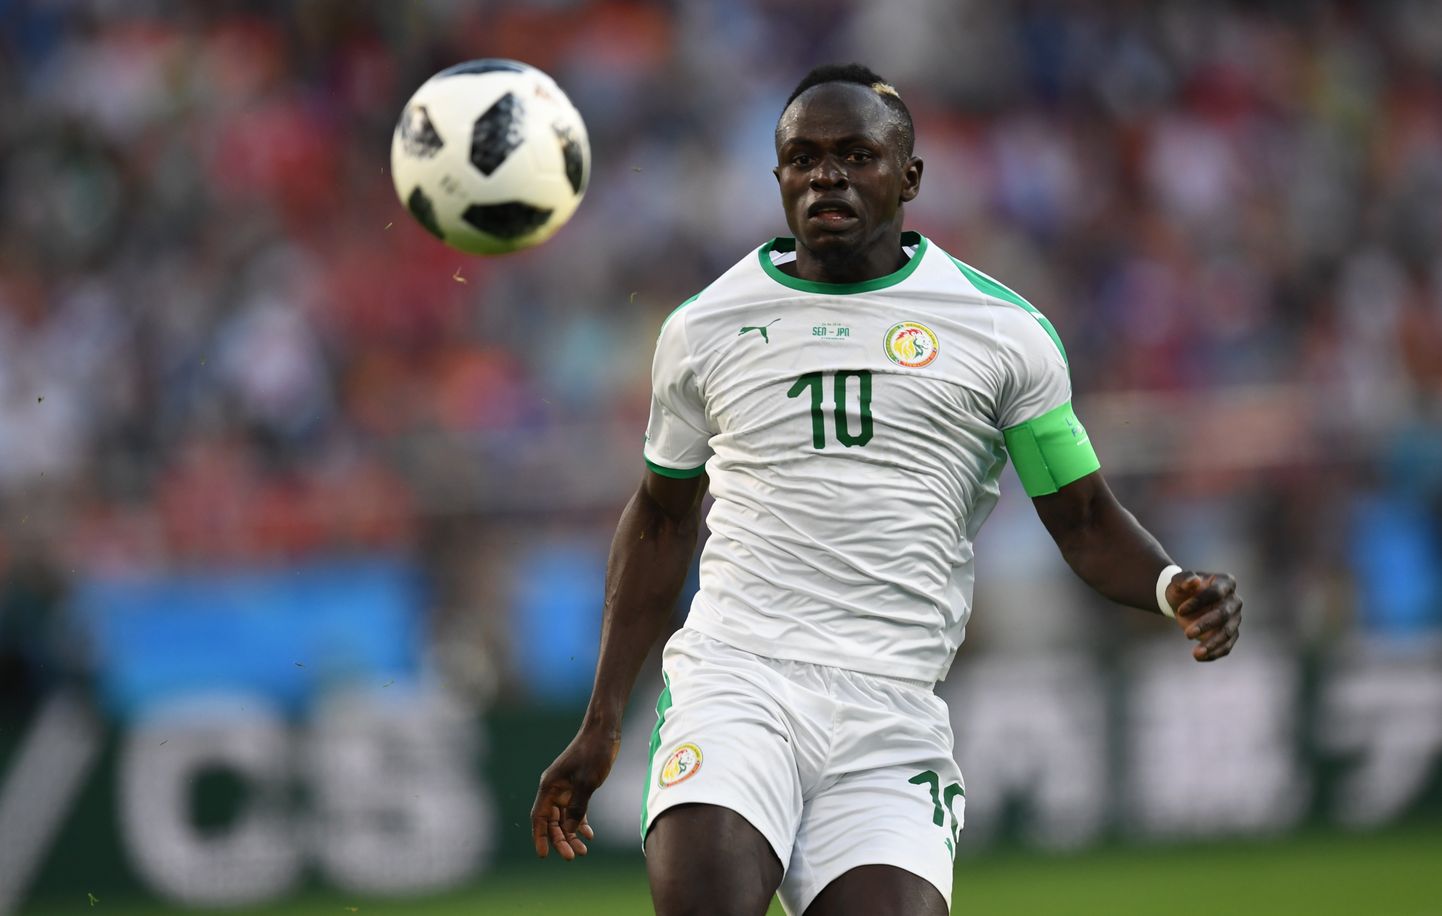 5554782 24.06.2018 Senegal's Sadio Mane controls a ball during the World Cup Group H soccer match between Japan and Senegal outside the Ekaterinburg Arena, in Yekaterinburg, Russia, June 24, 2018. Pavel Lisitsyn / Sputnik